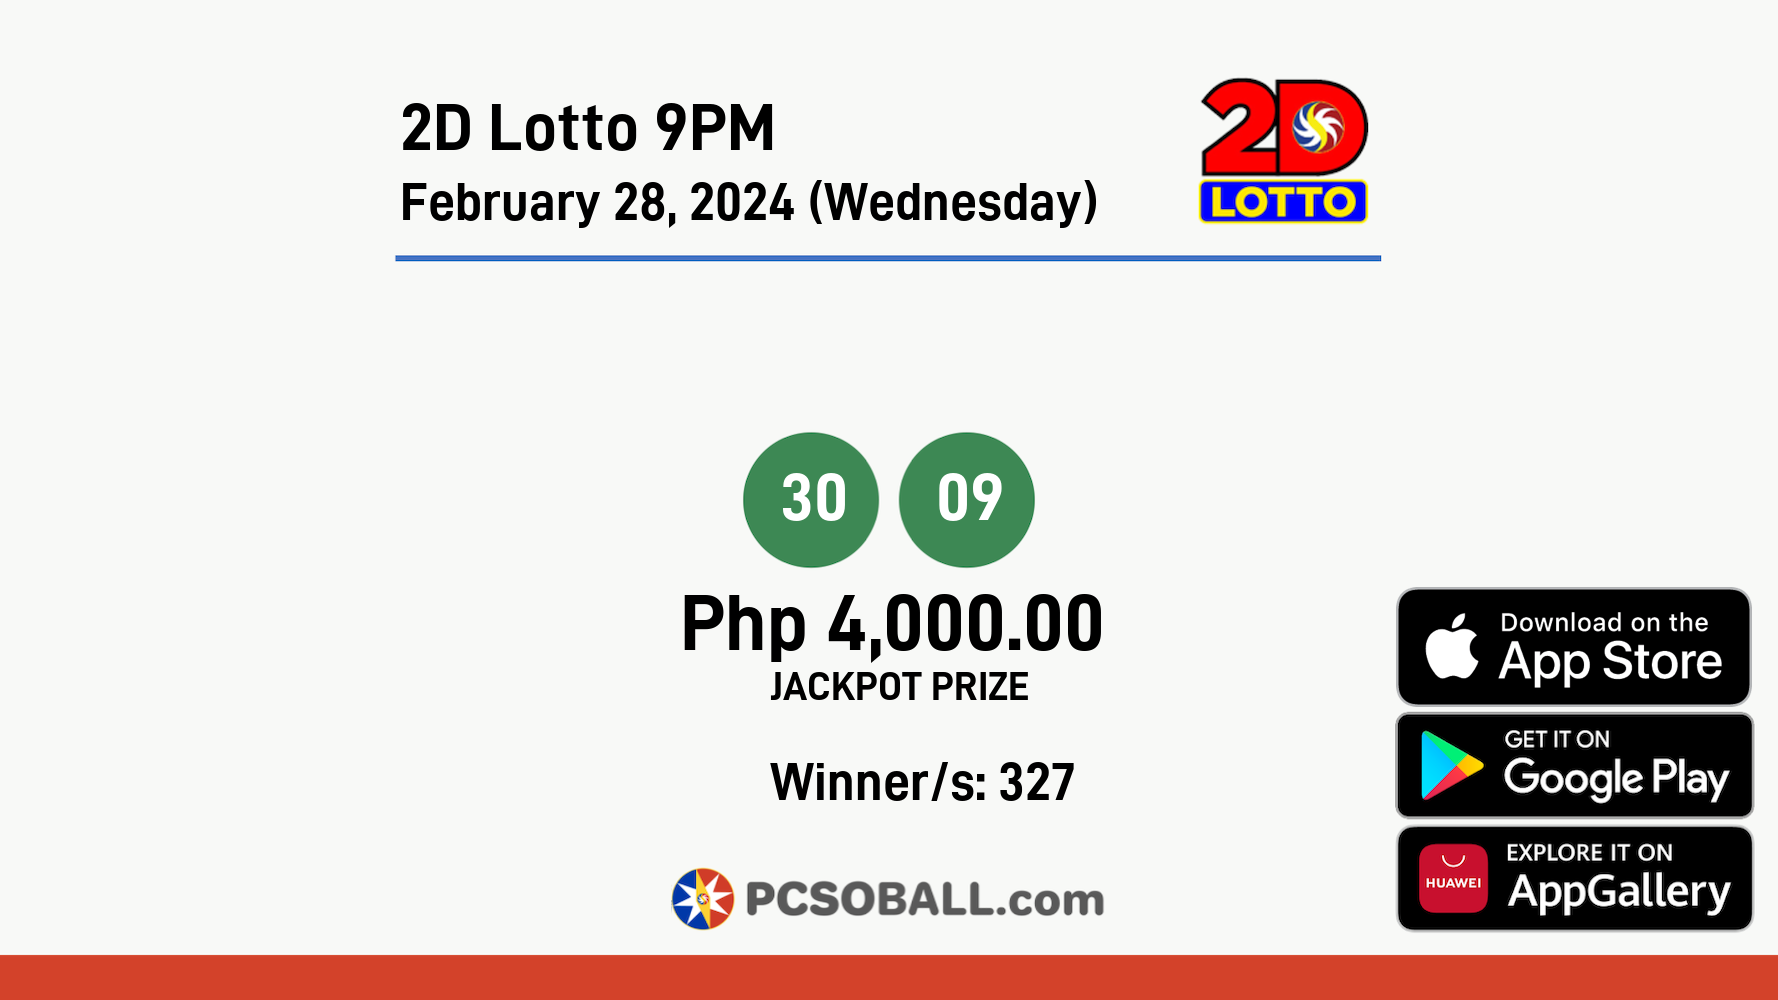 2D Lotto 9PM February 28, 2024 (Wednesday) Result